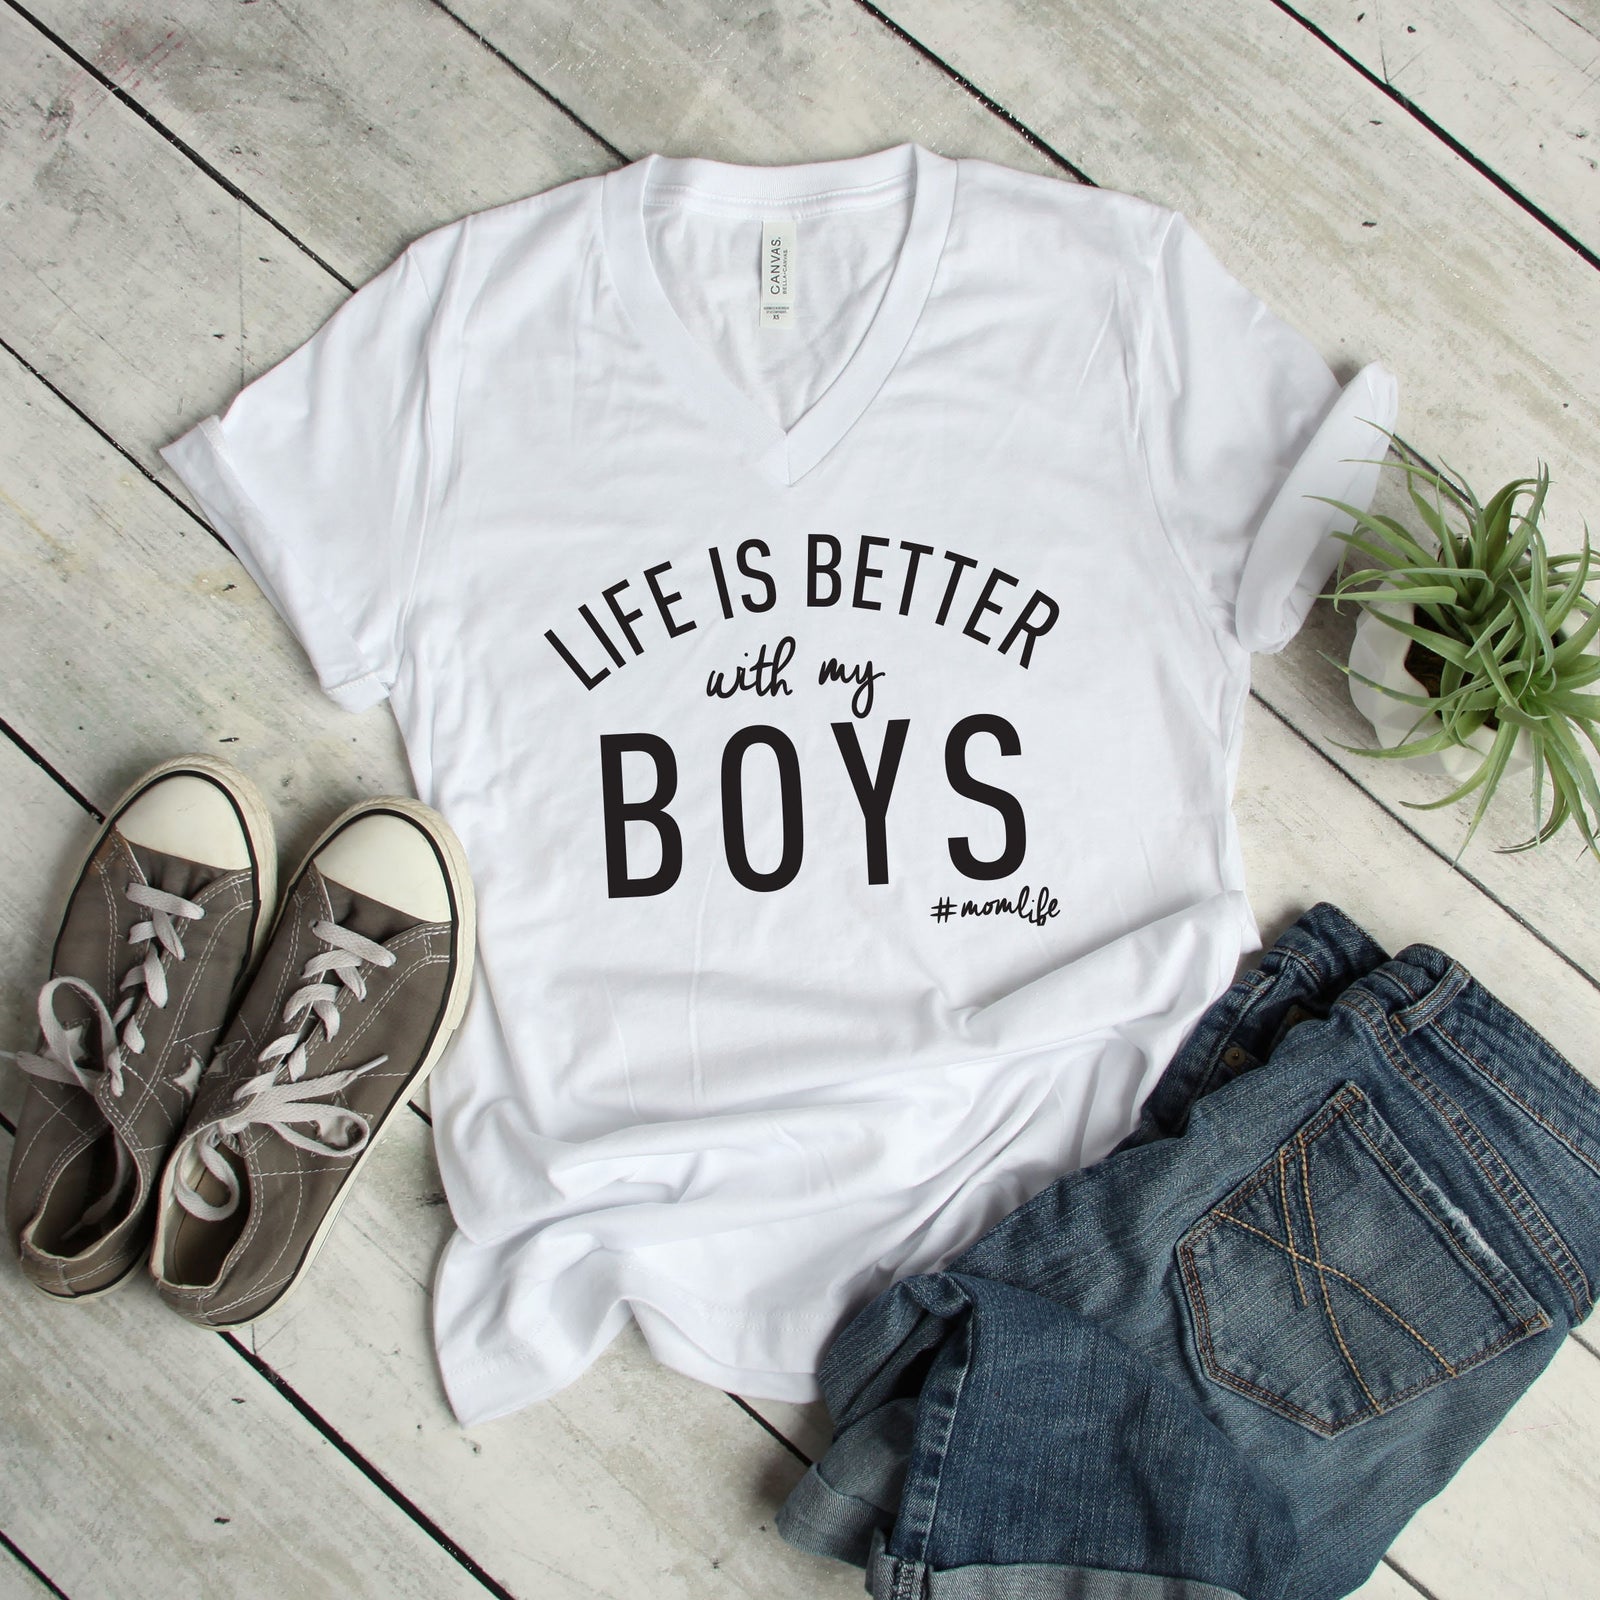 Life is Better with my Boys - Mom Life T Shirt - Mother's Day Gift Idea - Mom of Boys Shirt - Mom Gift Shirt